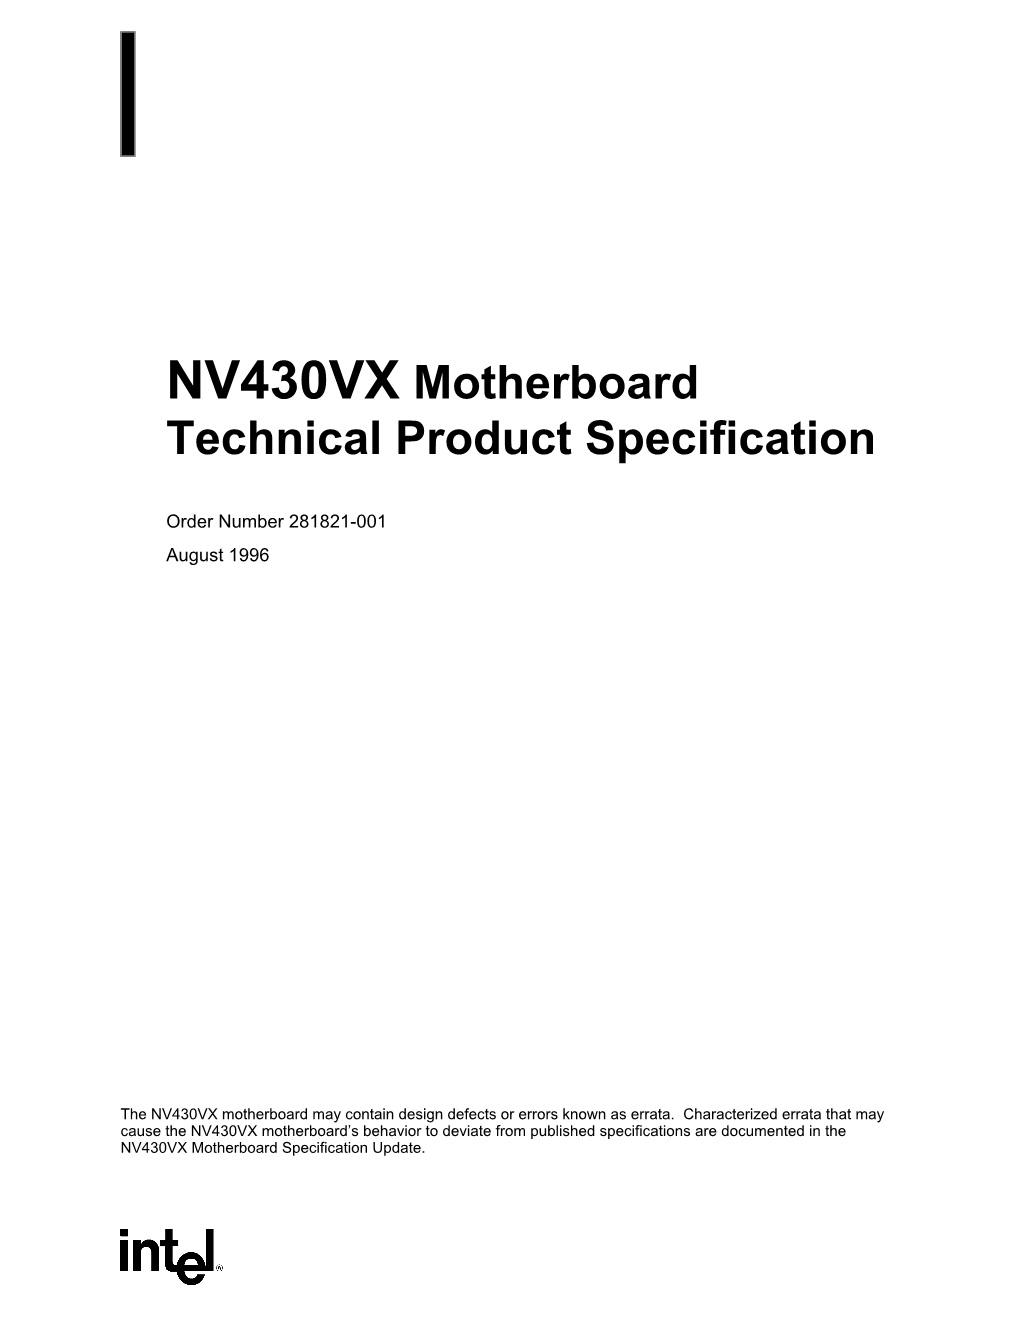 NV430VX Motherboard Technical Product Specification